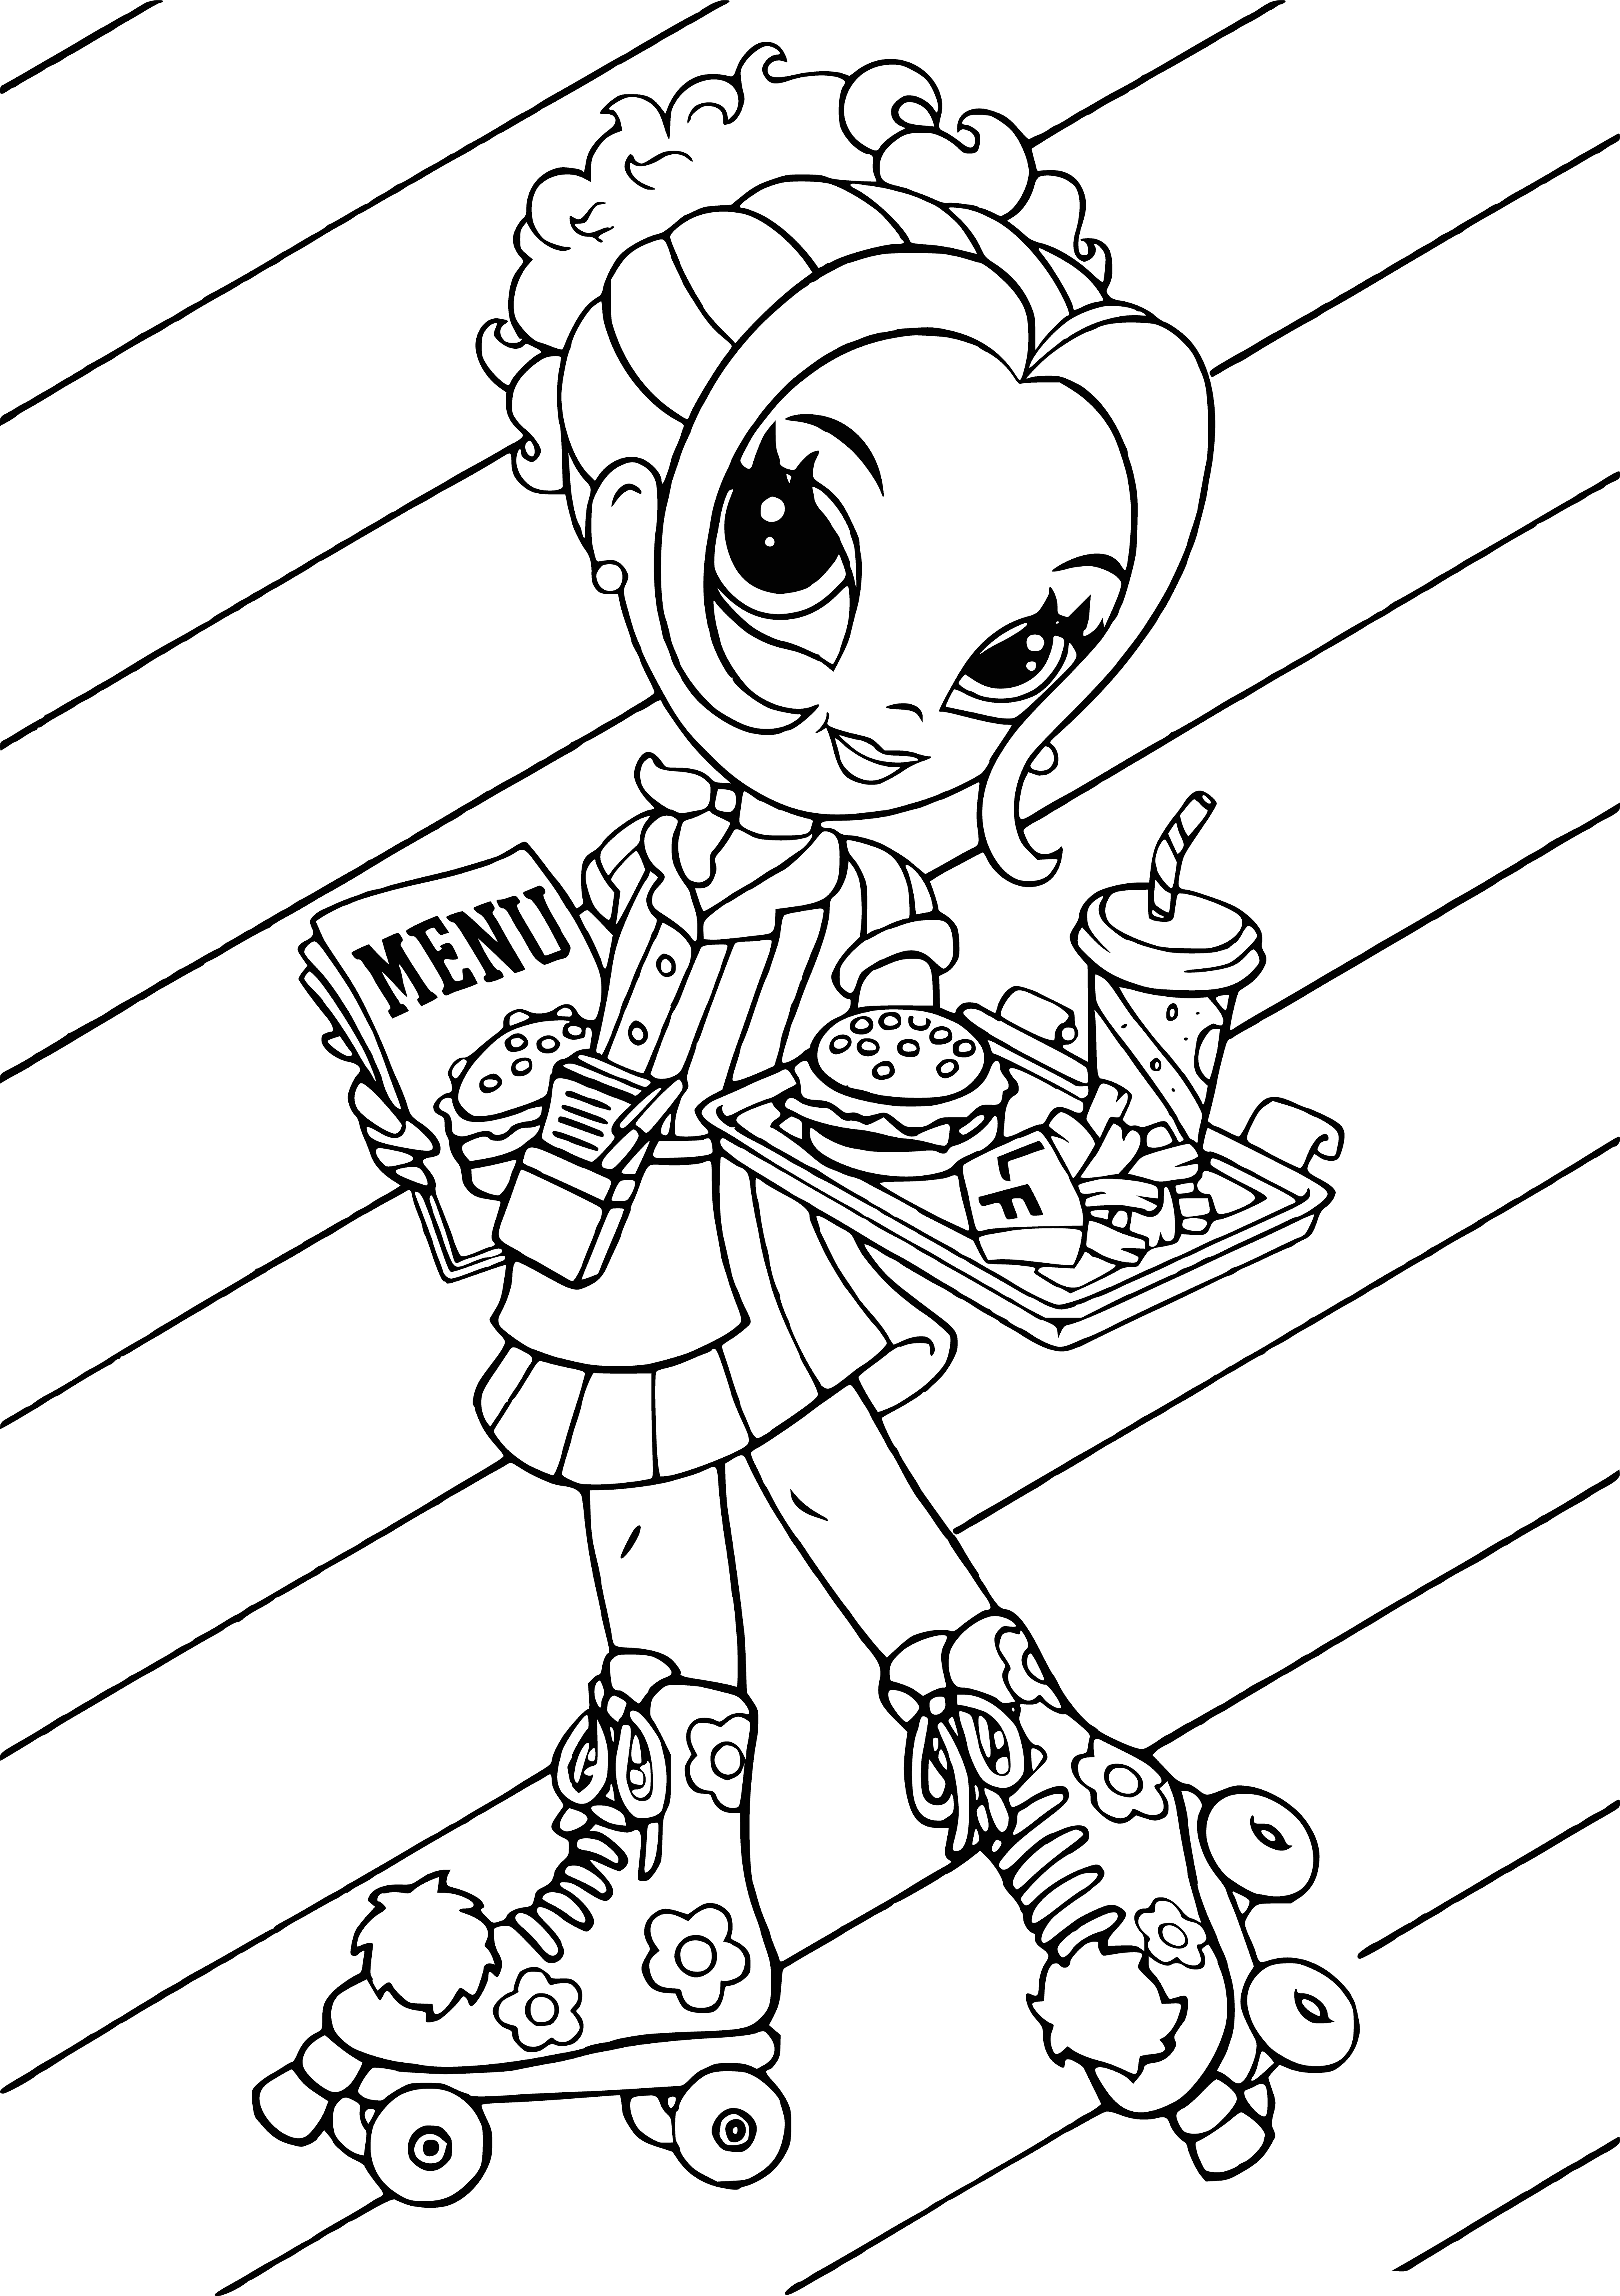 coloring page: Glam girl wearing pink dress with ruffled skirt, elegant updo, and rhinestone necklace. #LisaFrank #Glamorous